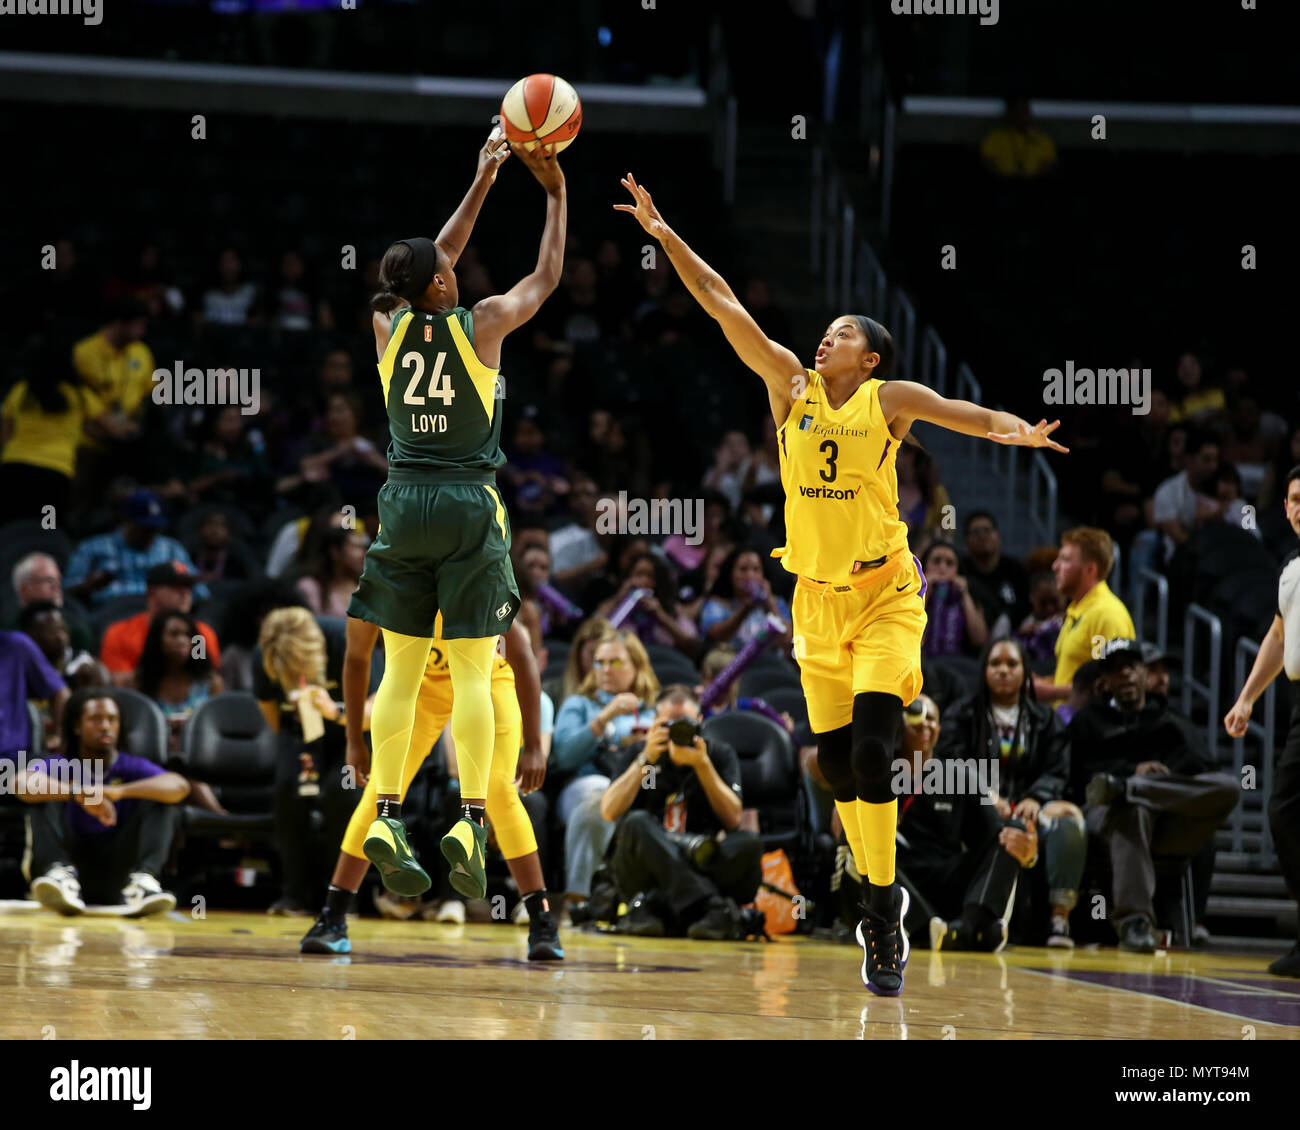 Seattle Storm guard Jewell Loyd #24 shooting over Los Angeles Sparks forward Candace Parker #3 during the Seattle Storm vs Los Angeles Sparks game at Staples Center in Los Angeles, Ca on June 7, 2018. (Photo by Jevone Moore) Stock Photo